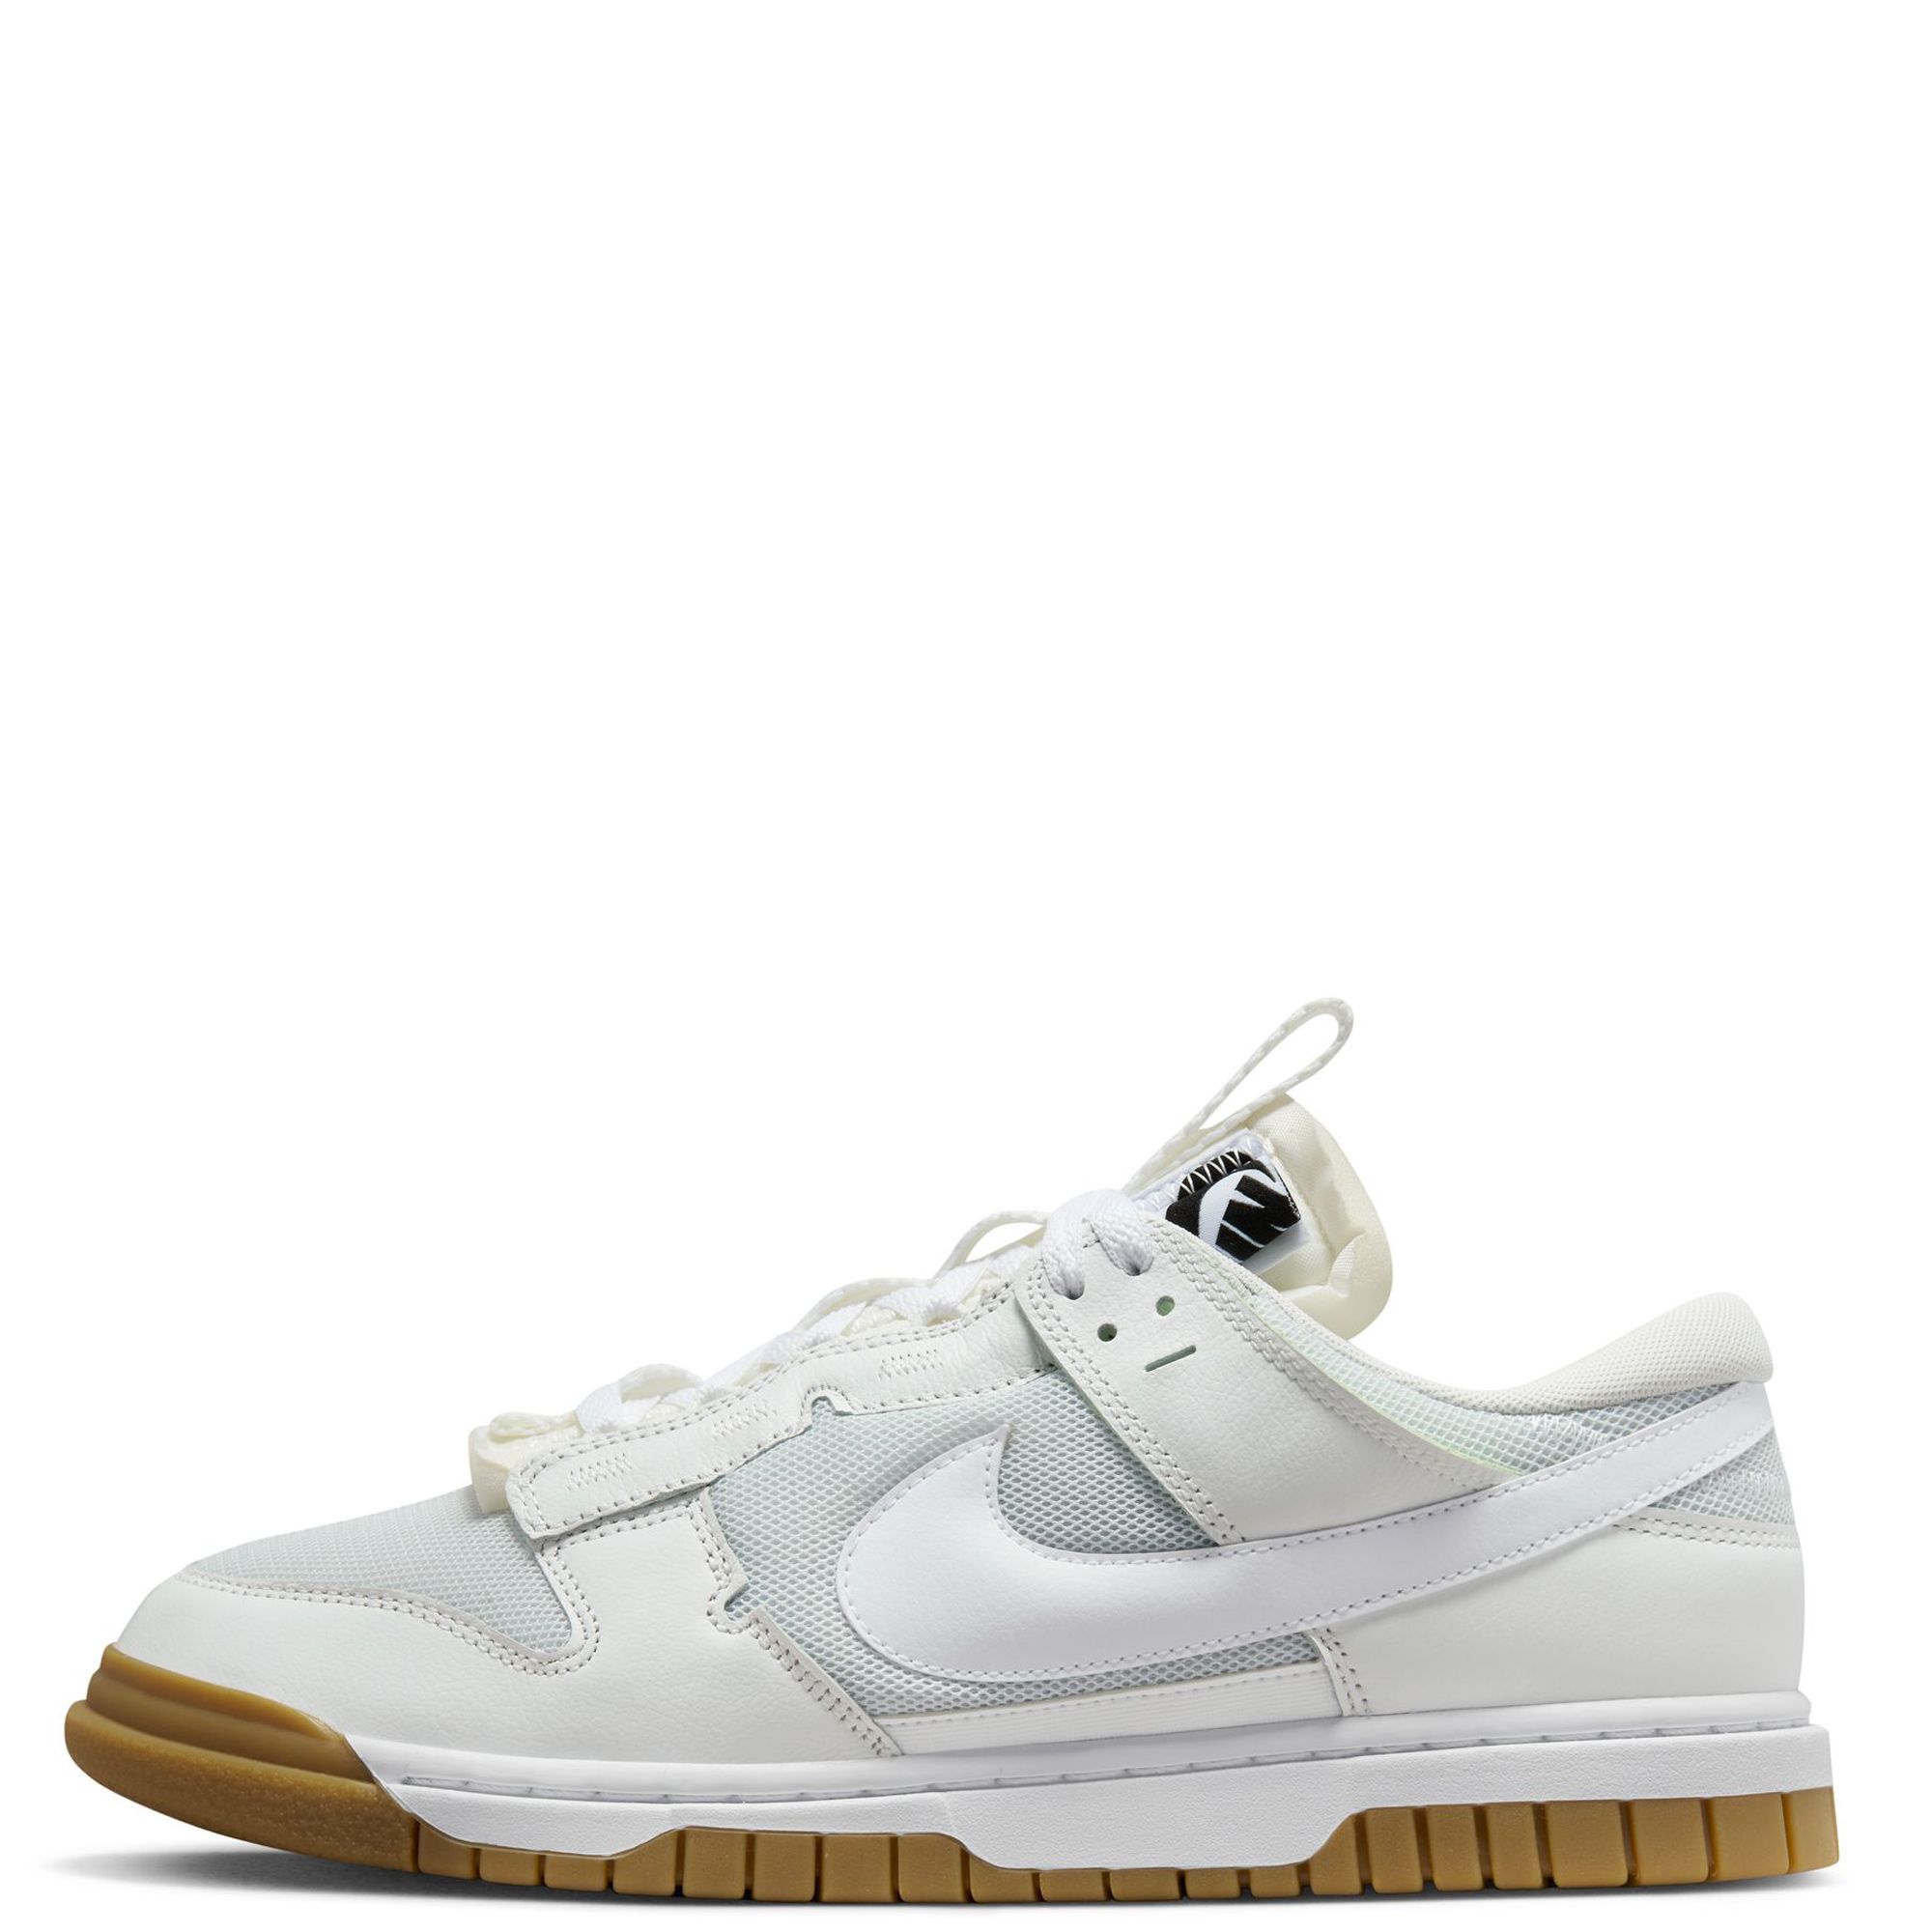 Nike Dunk Low Remastered White Gum - Sneakers DV0821-001